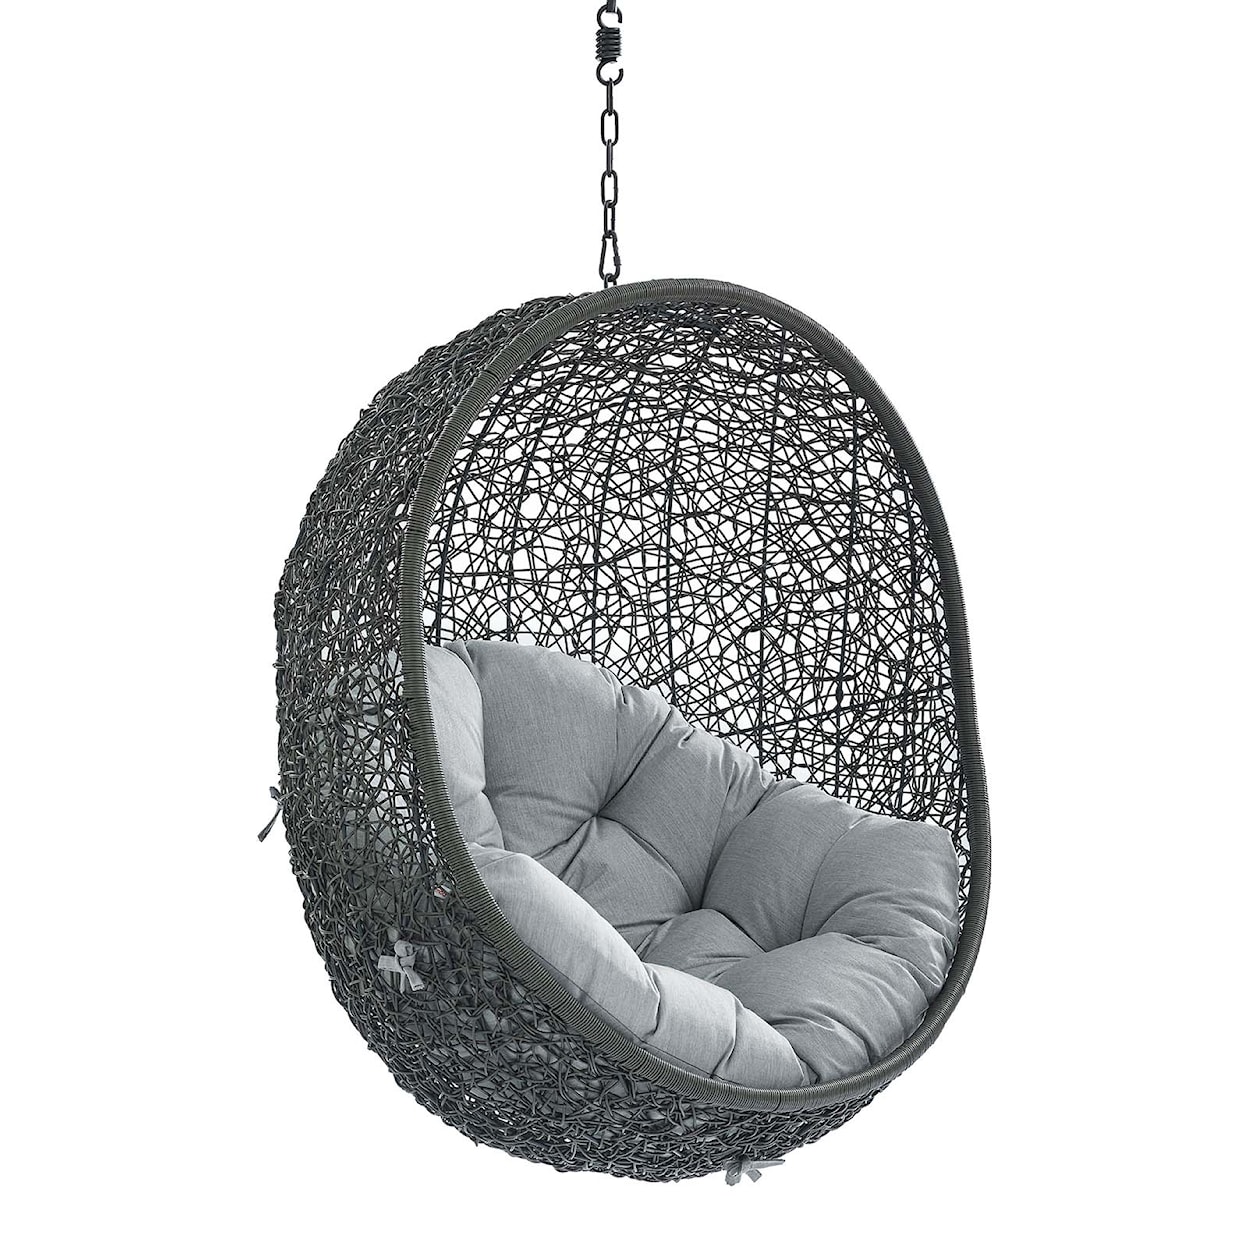 Modway Hide Outdoor Lounge Chair Swing